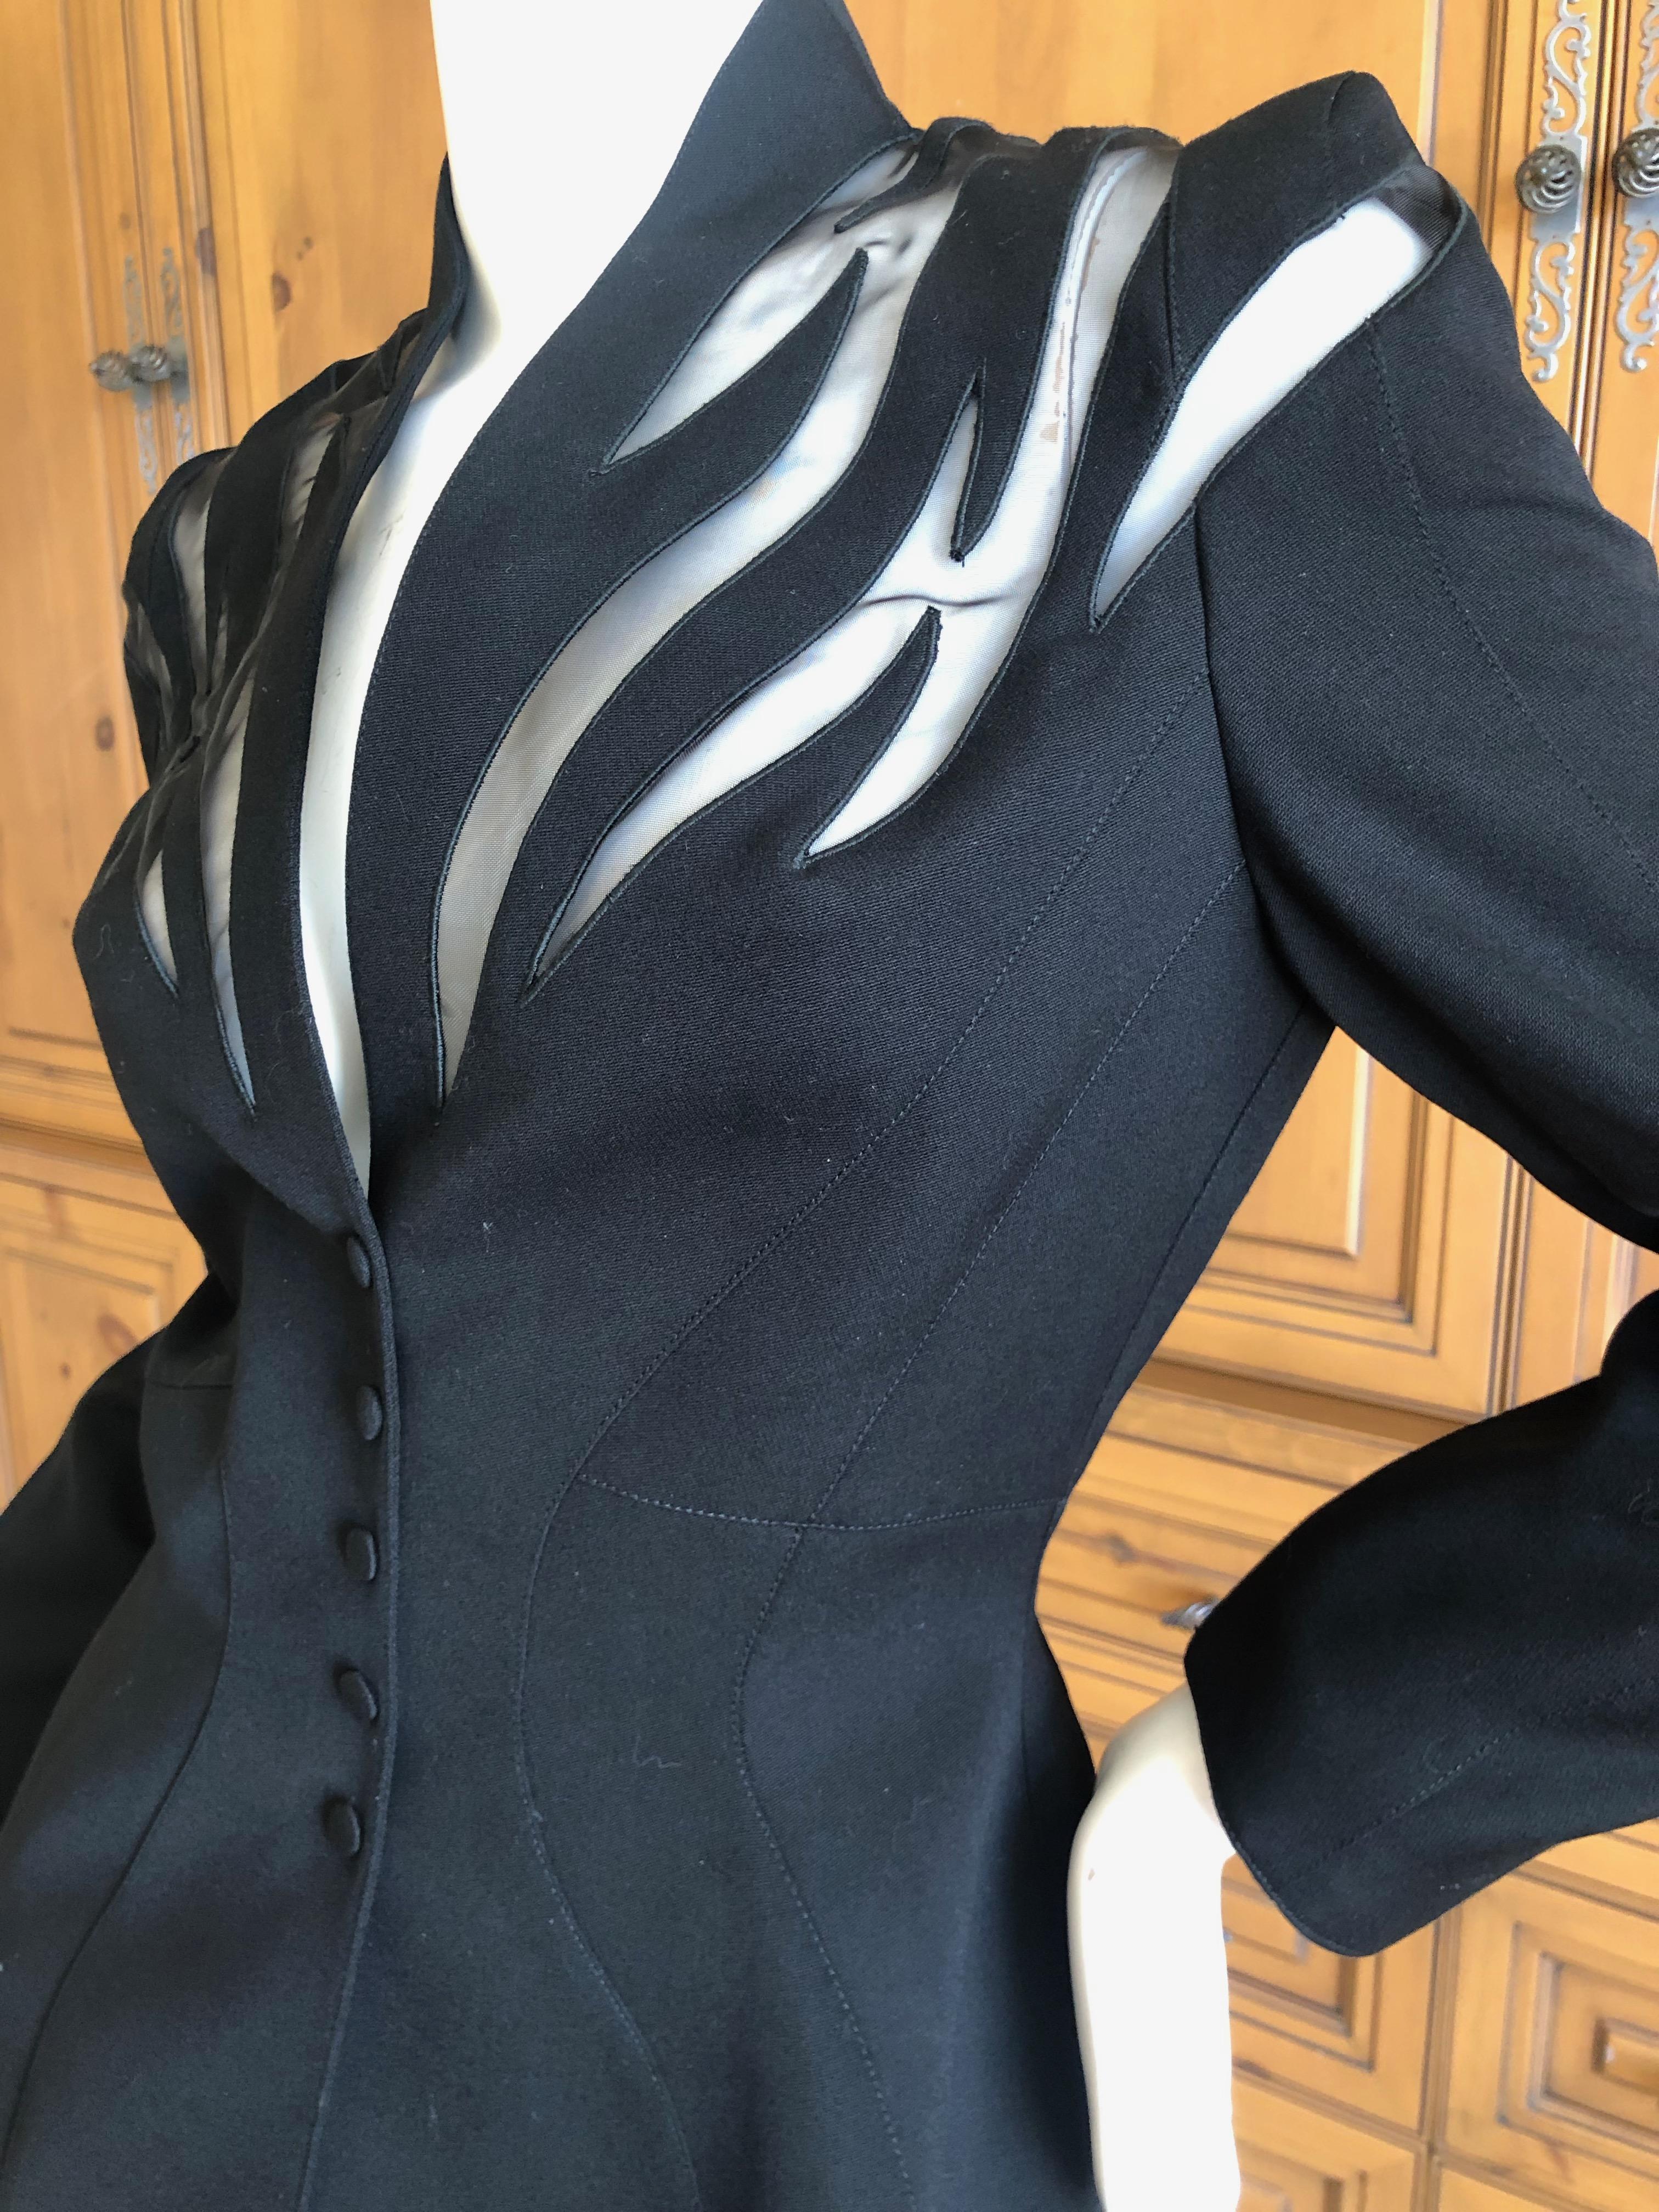 Thierry Mugler Vintage 1980's Black Peplum Suit with Sheer Flame Pattern Details For Sale 3